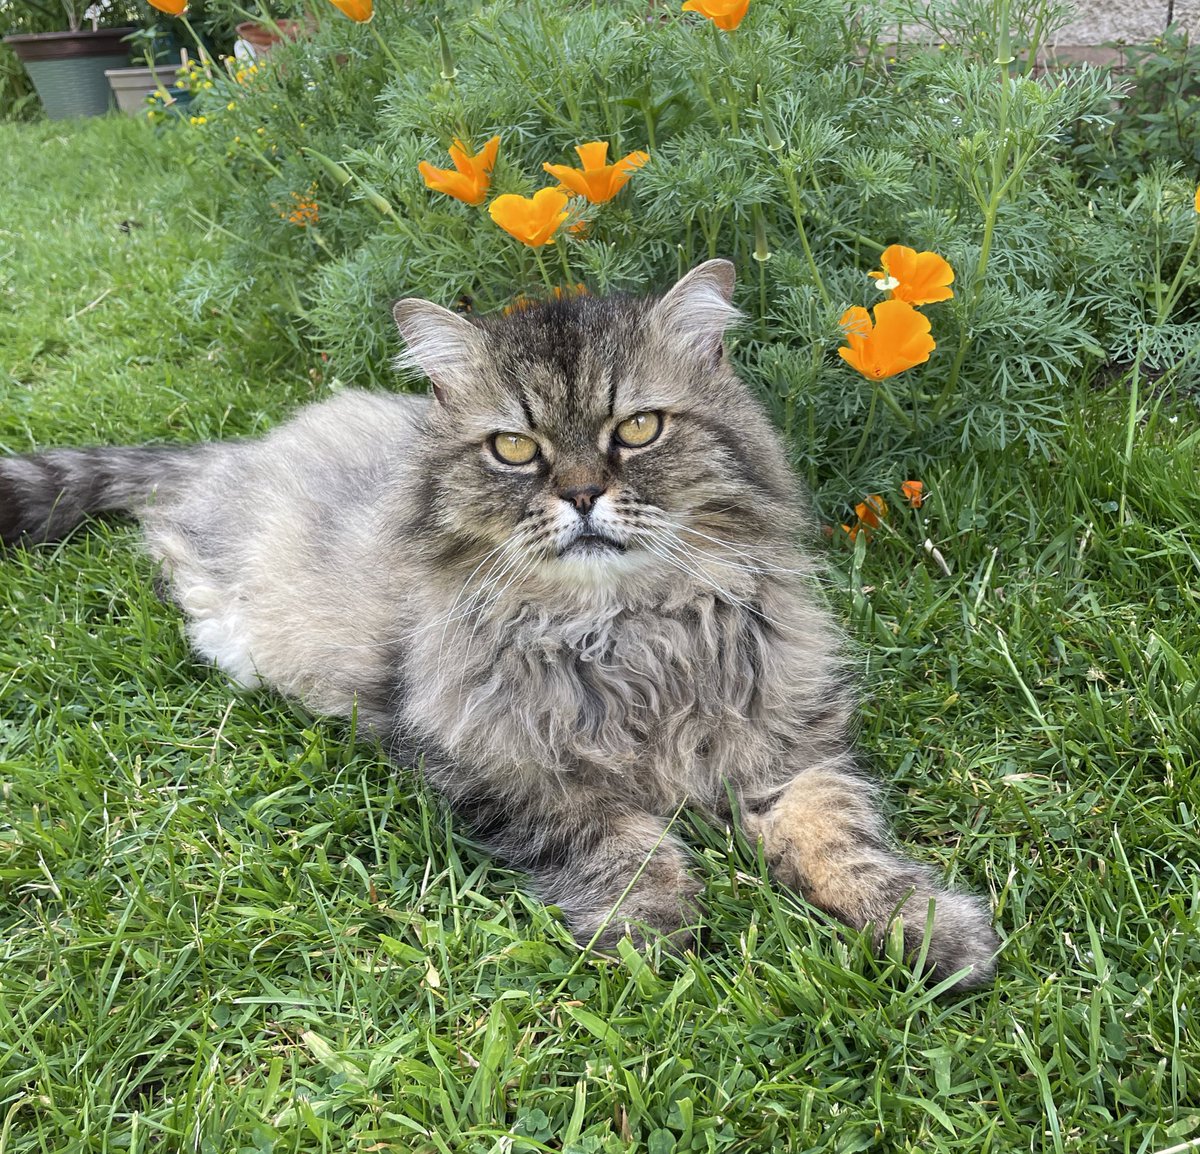 As part of Leo’s Legacy, we would like to have a memorial plaque or bench in the communal gardens. This was Leo’s favourite place where he reigned as King of the Cat Club. If you wish to help, please donate through this link: justgiving.com/crowdfunding/l… #LeosLegacy #CatsOfTwitter